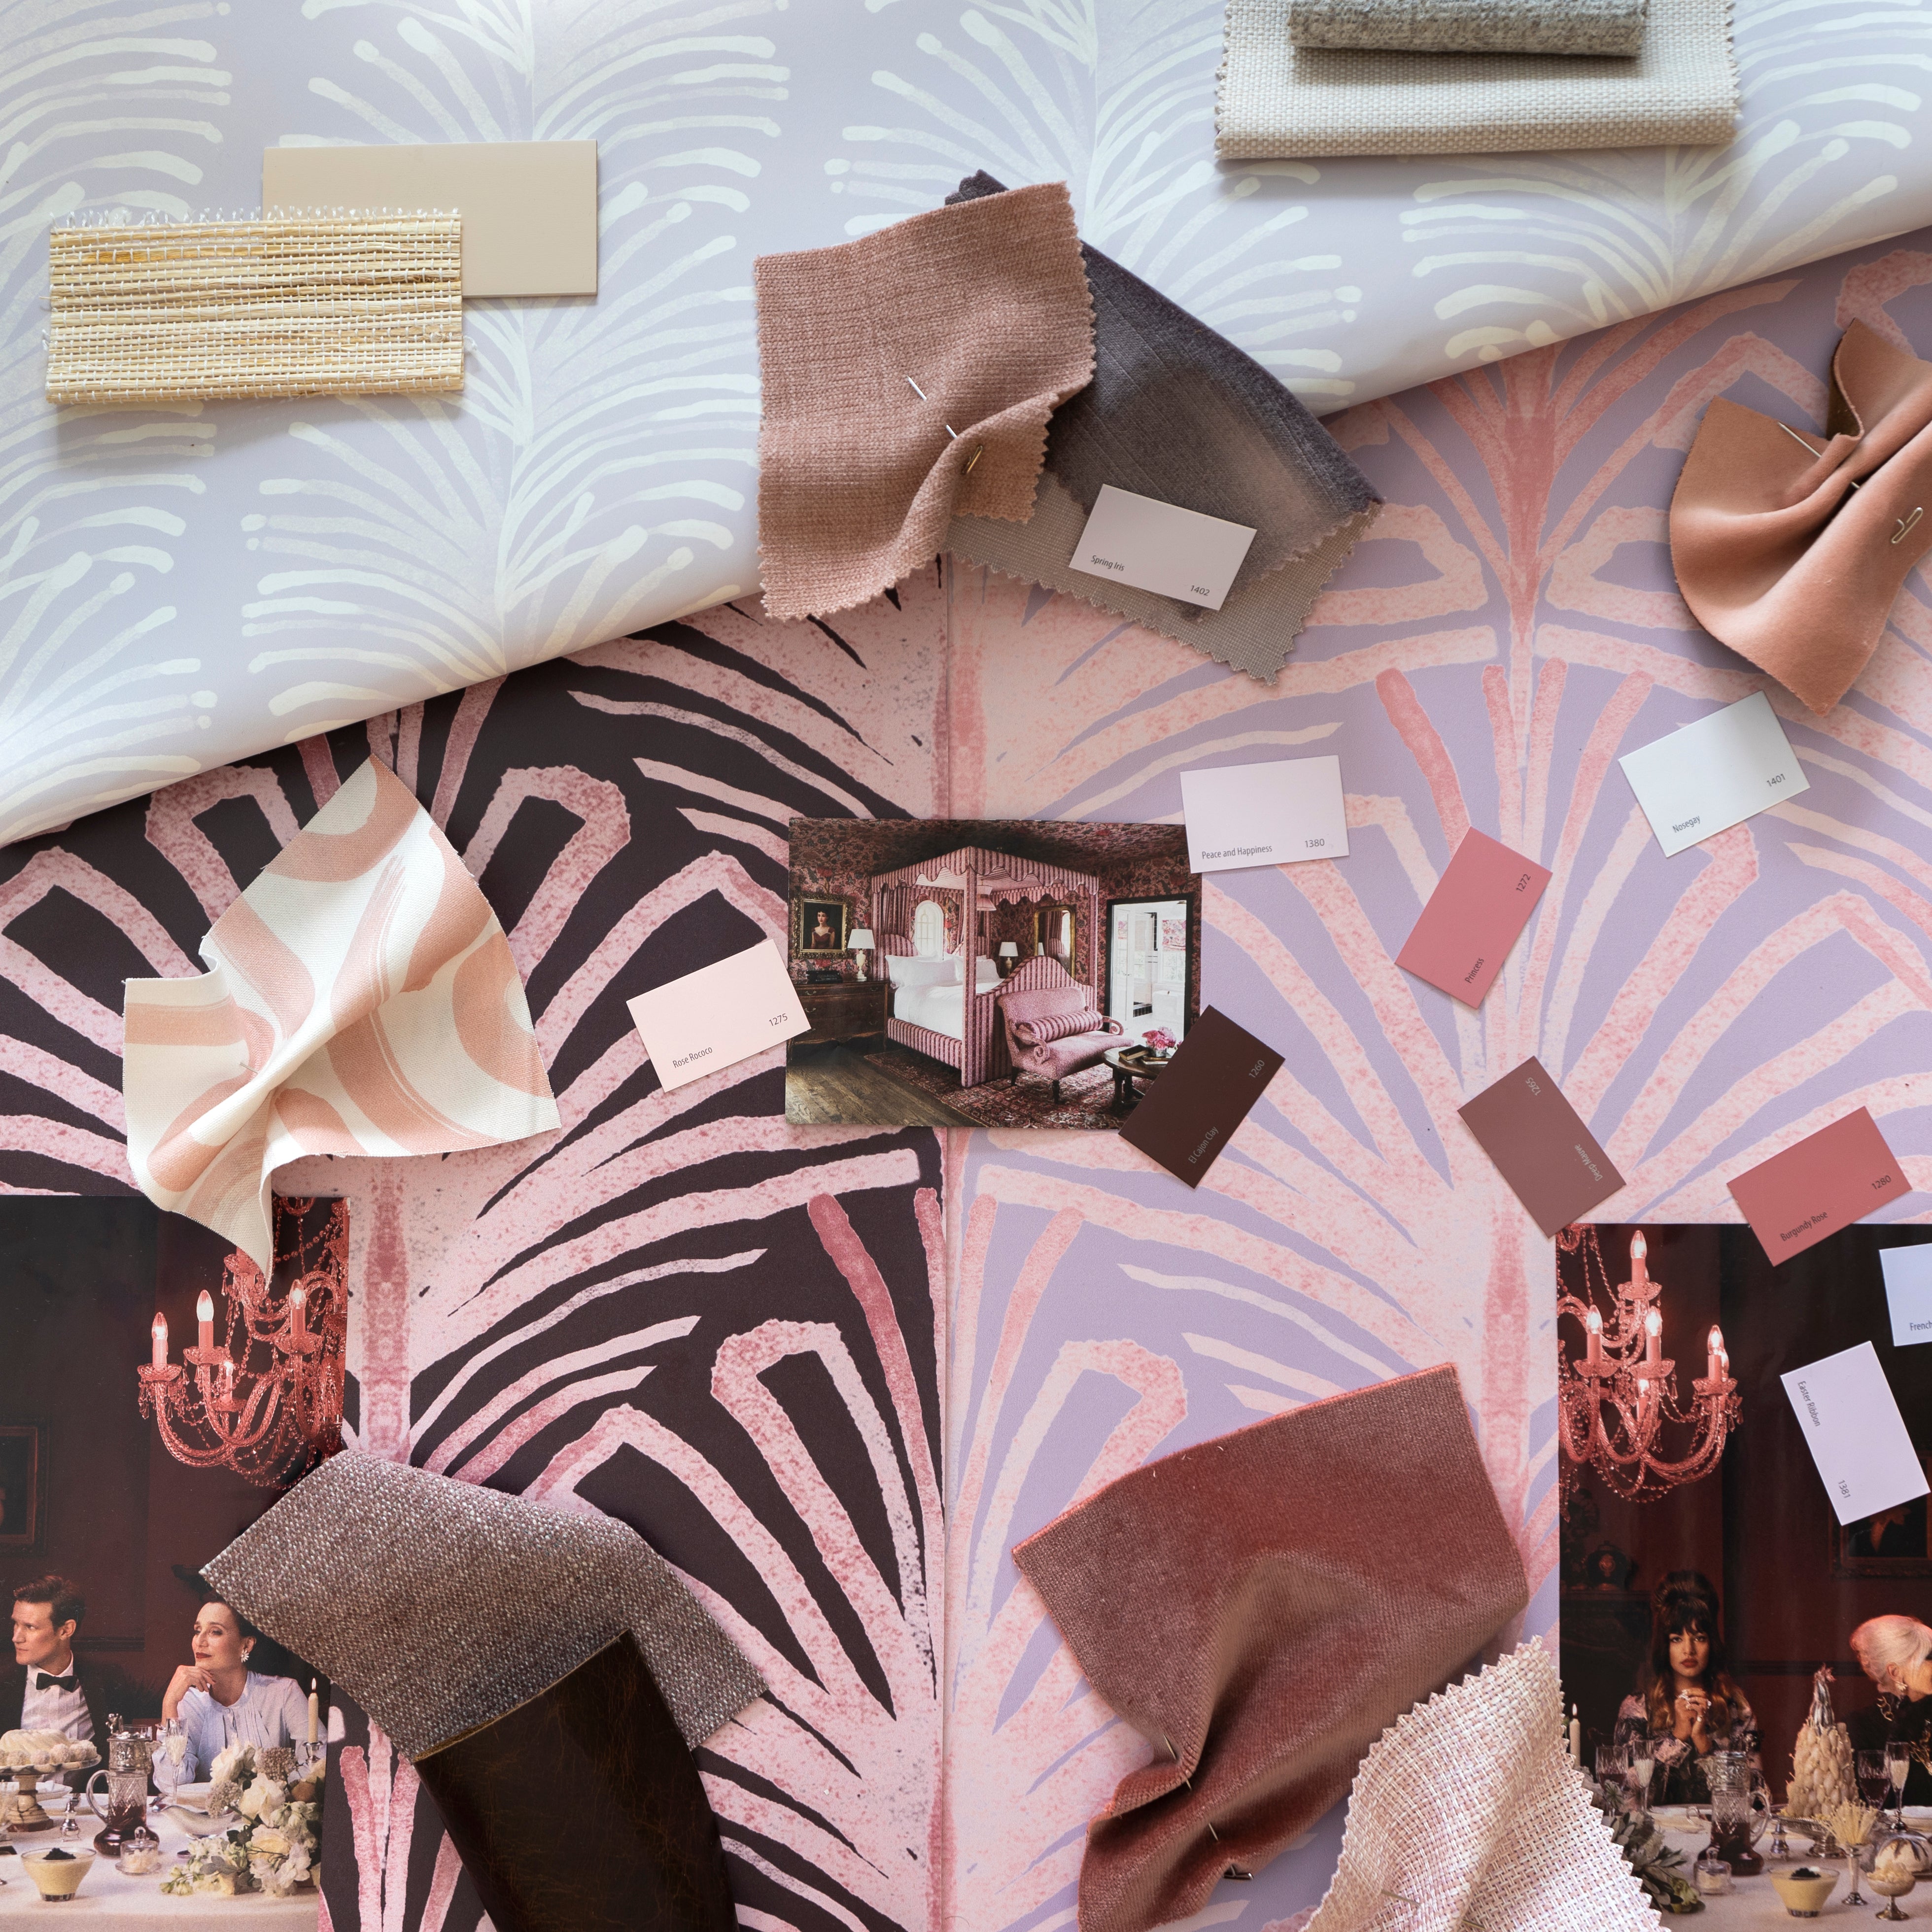 Interior design moodboard and fabric inspirations with Coral Velvet swatch, Pink Graphic printed cotton swatch, and Light Pink Velvet swatch